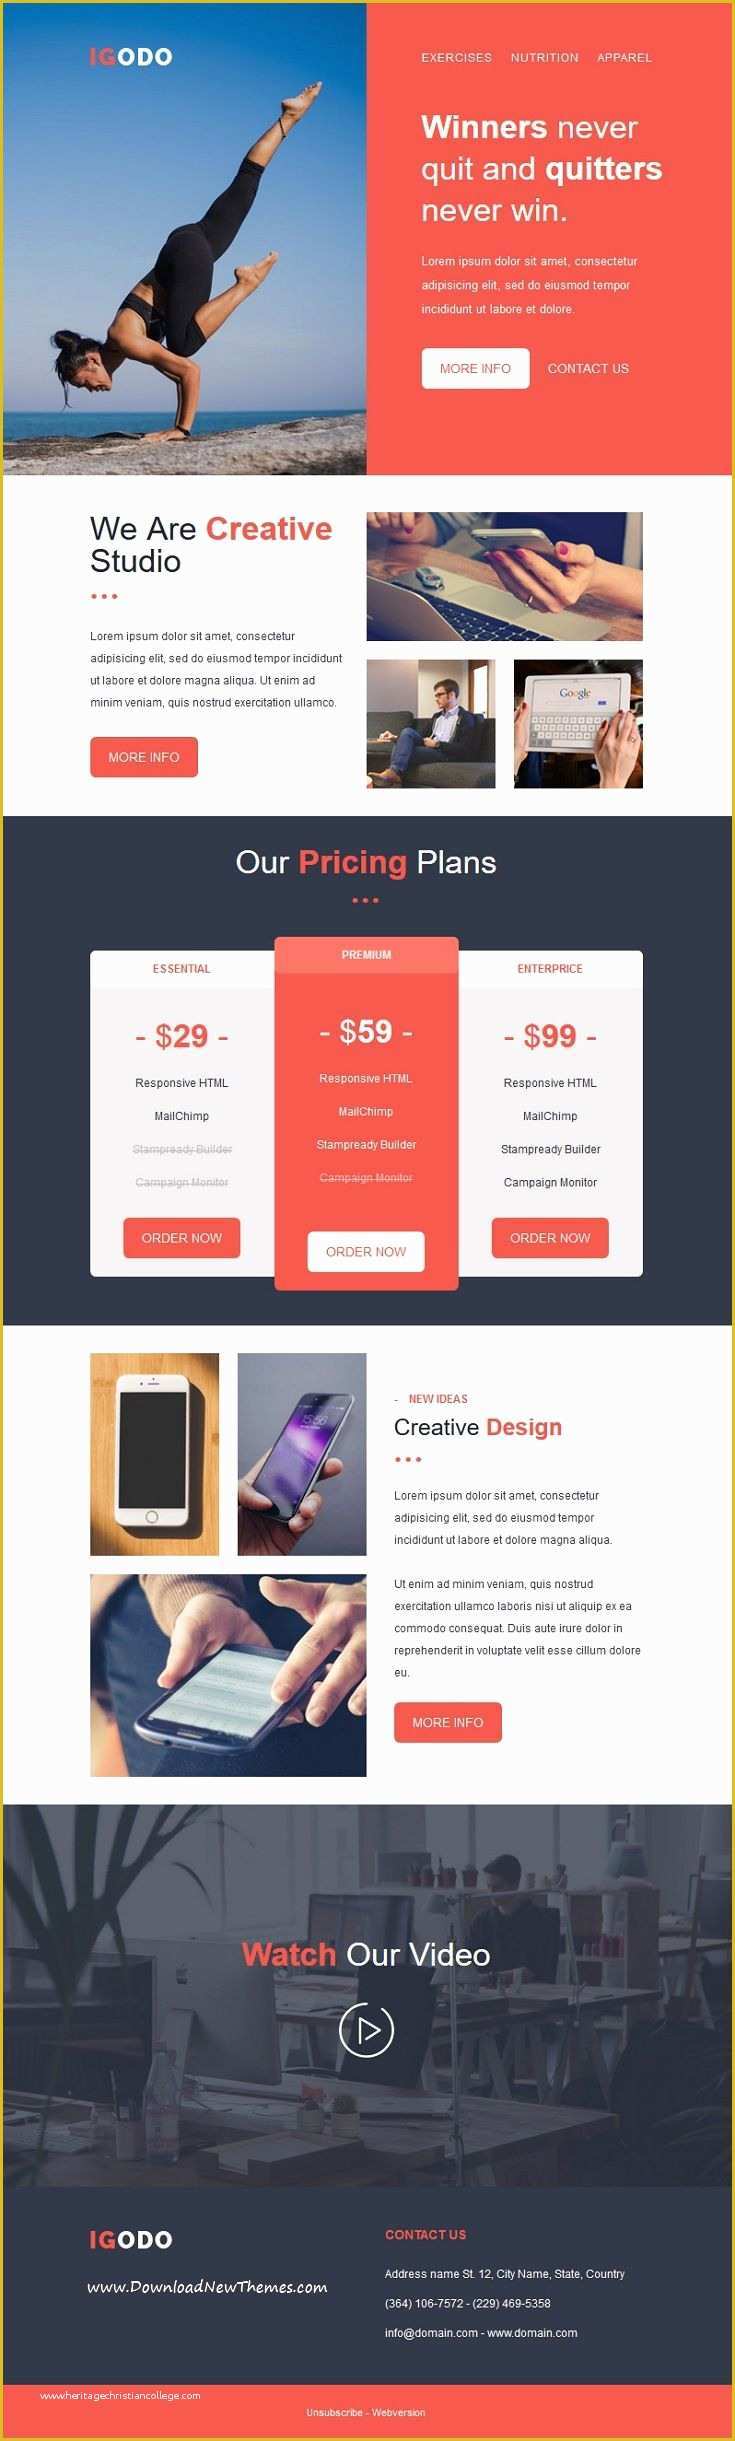 Free Responsive Email Template Mailchimp Of Best 25 Mailchimp Newsletter Templates Ideas On Pinterest